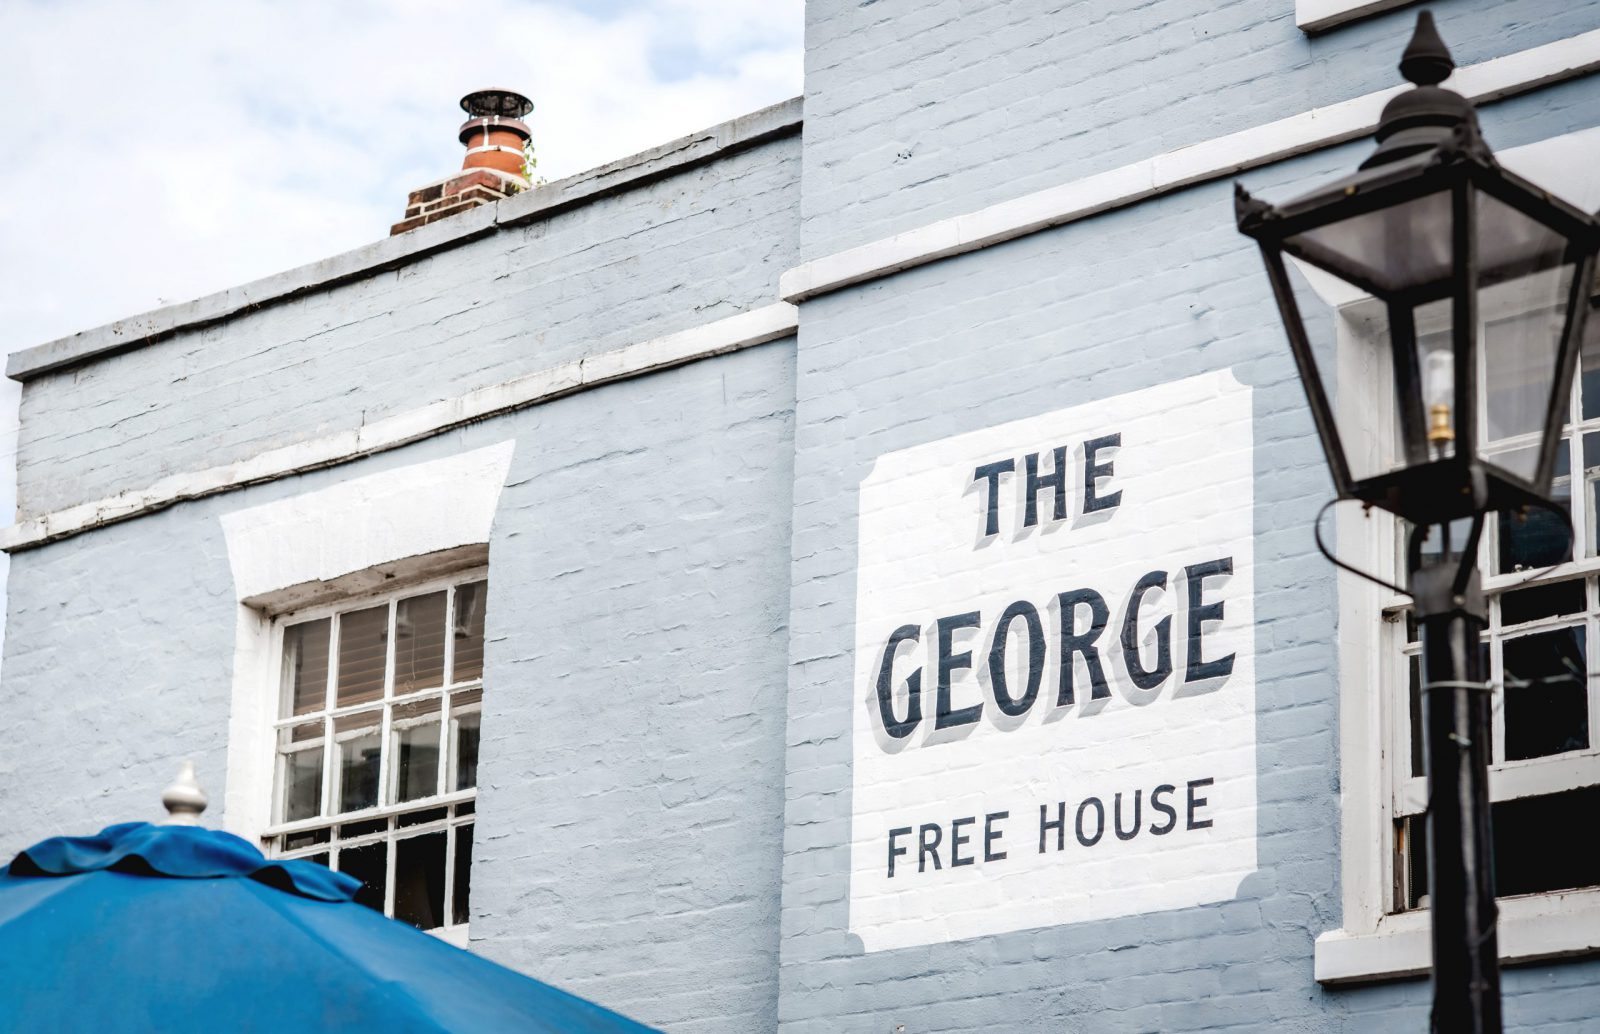 The George Exterior, including painted sign